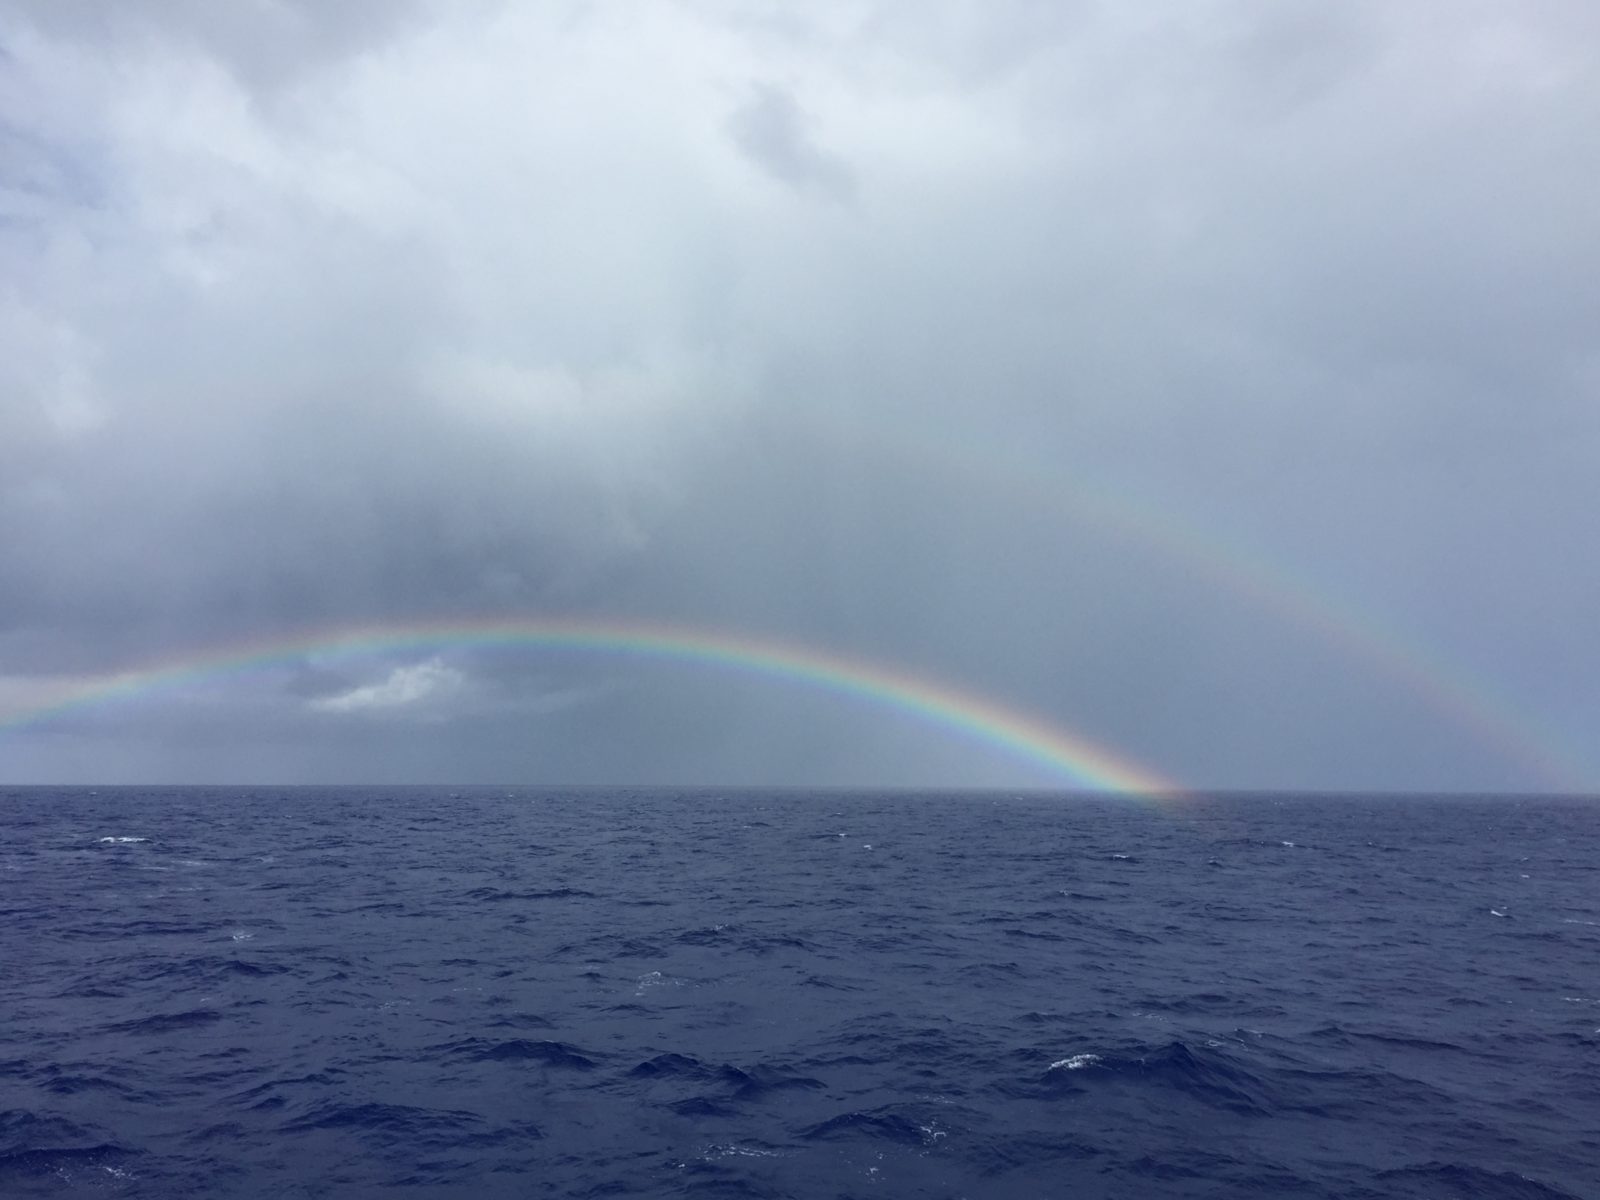 two rainbows over the ocean